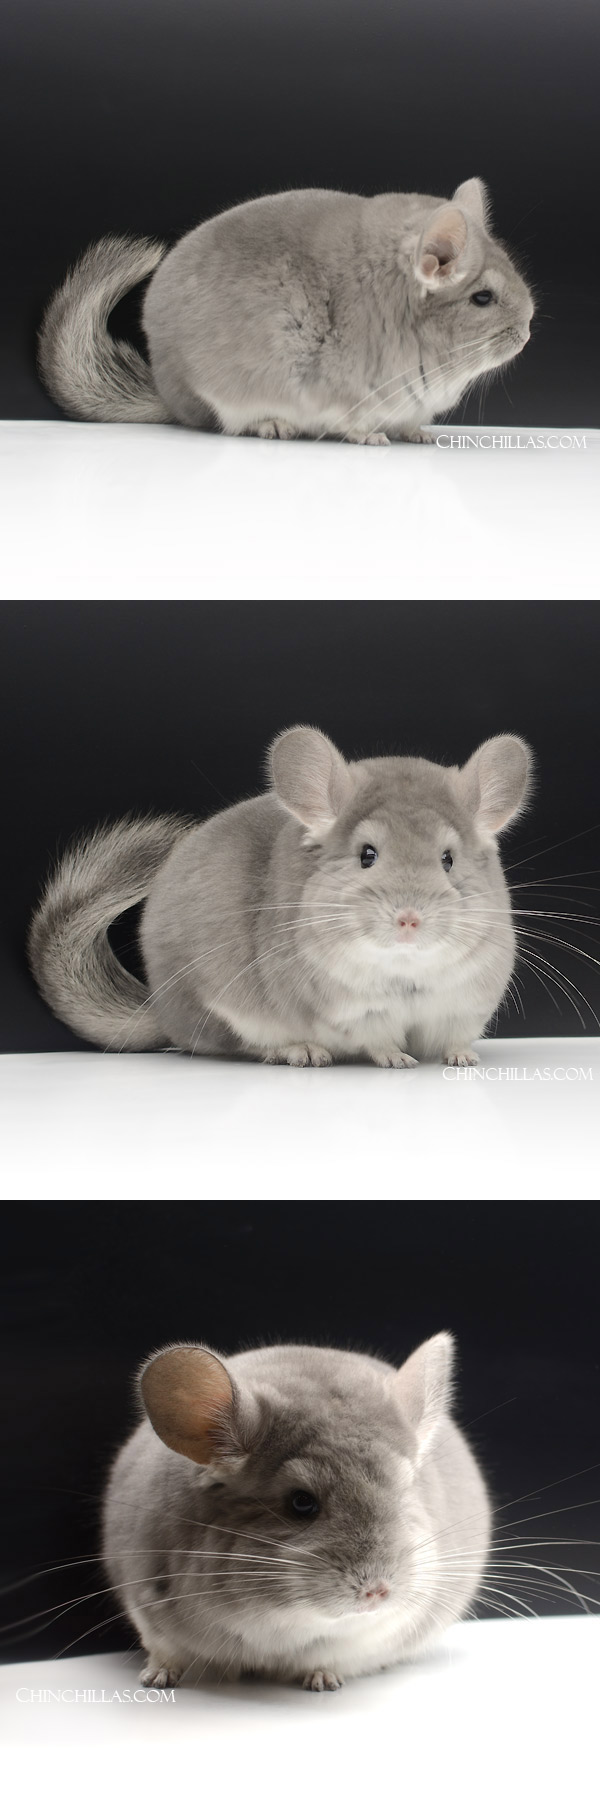 Chinchilla or related item offered for sale or export on Chinchillas.com - 000021 Large, Exceptional Violet ( Royal Persian Angora Carrier ) Female Chinchilla